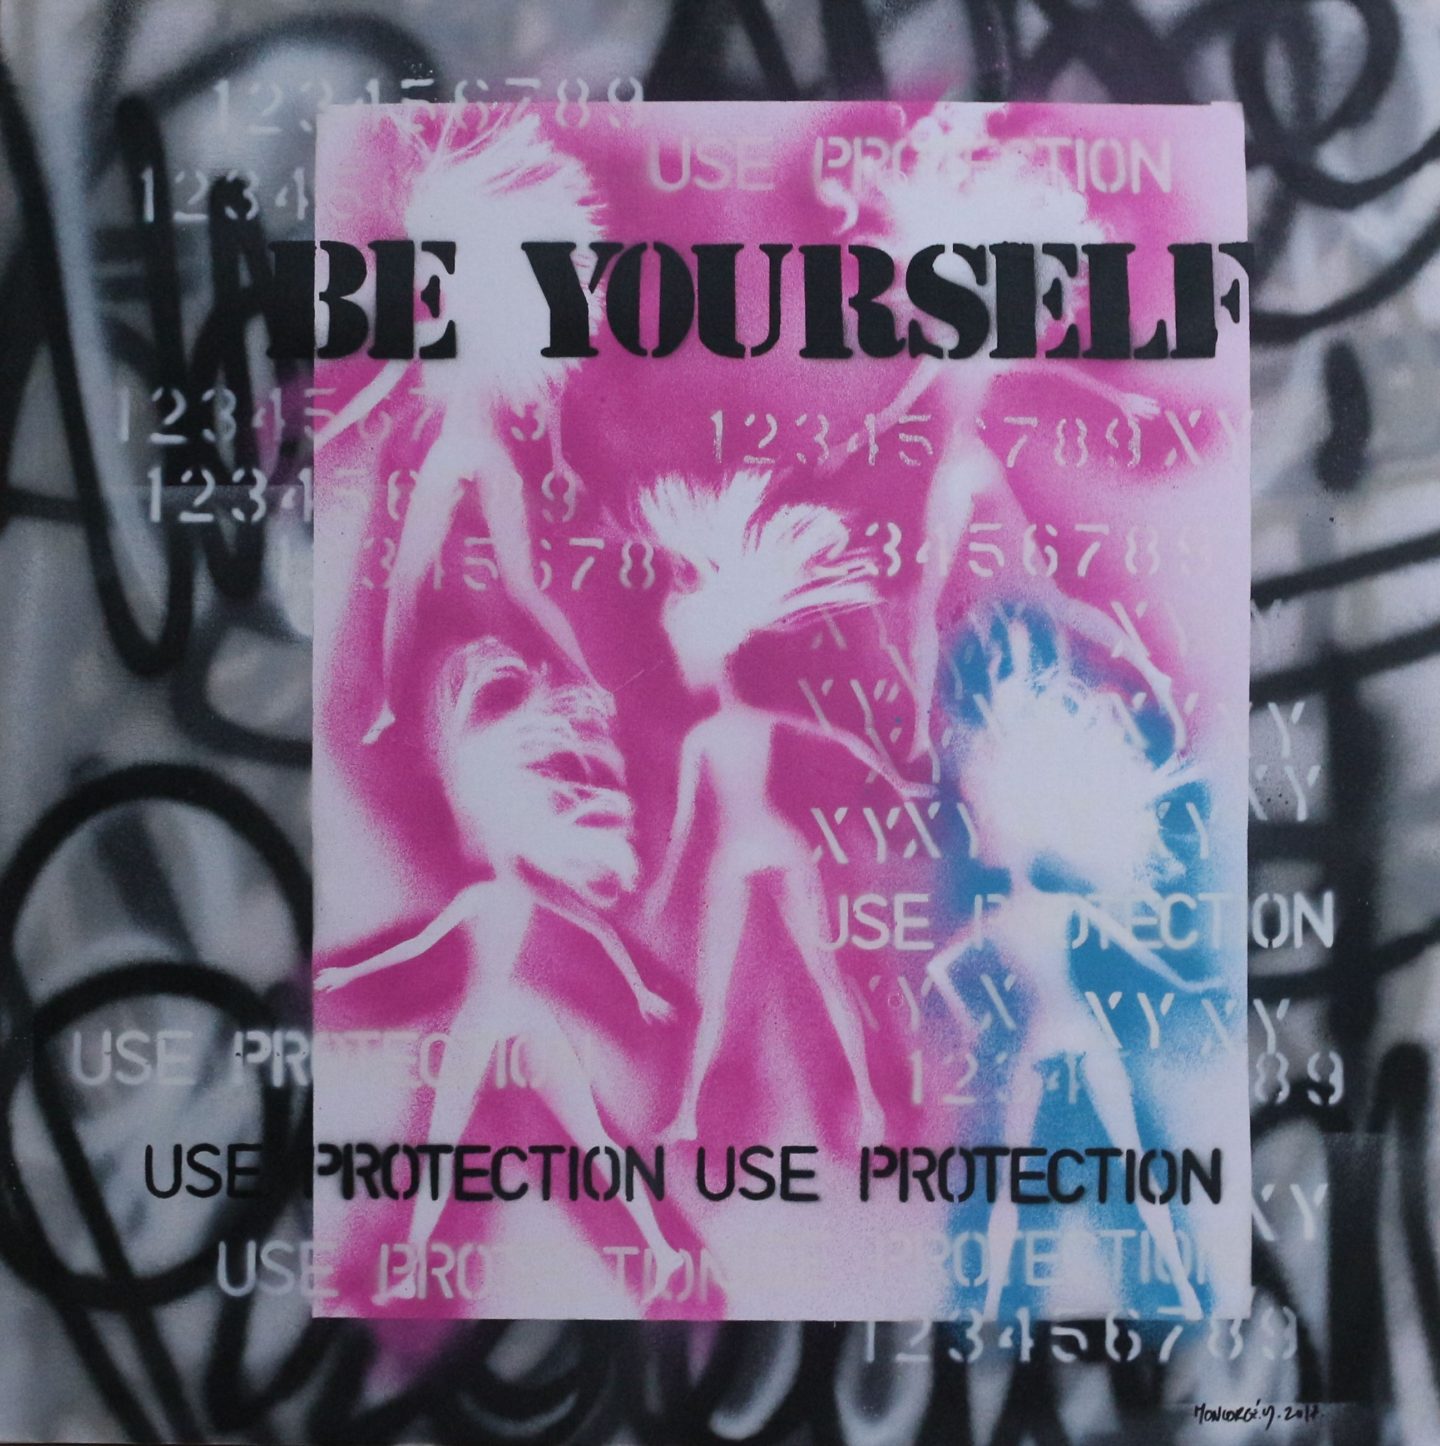 BARBIEMETRIE. Série FIGHT: "BE YOURSELF USE PROTECTION".